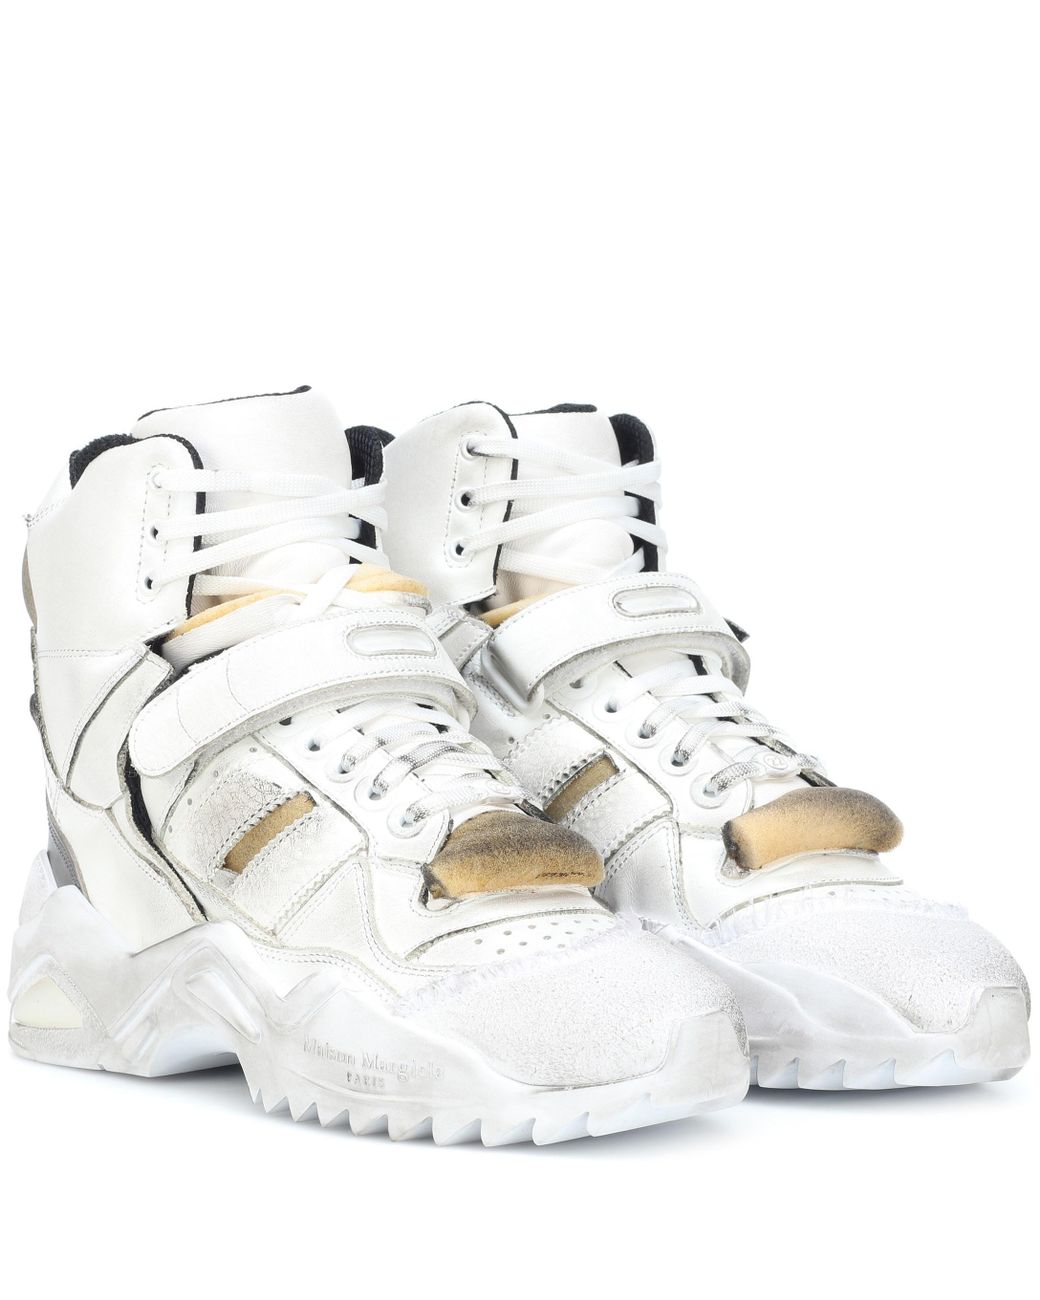 Maison Margiela Retro Fit Leather High-top Sneakers in White | Lyst